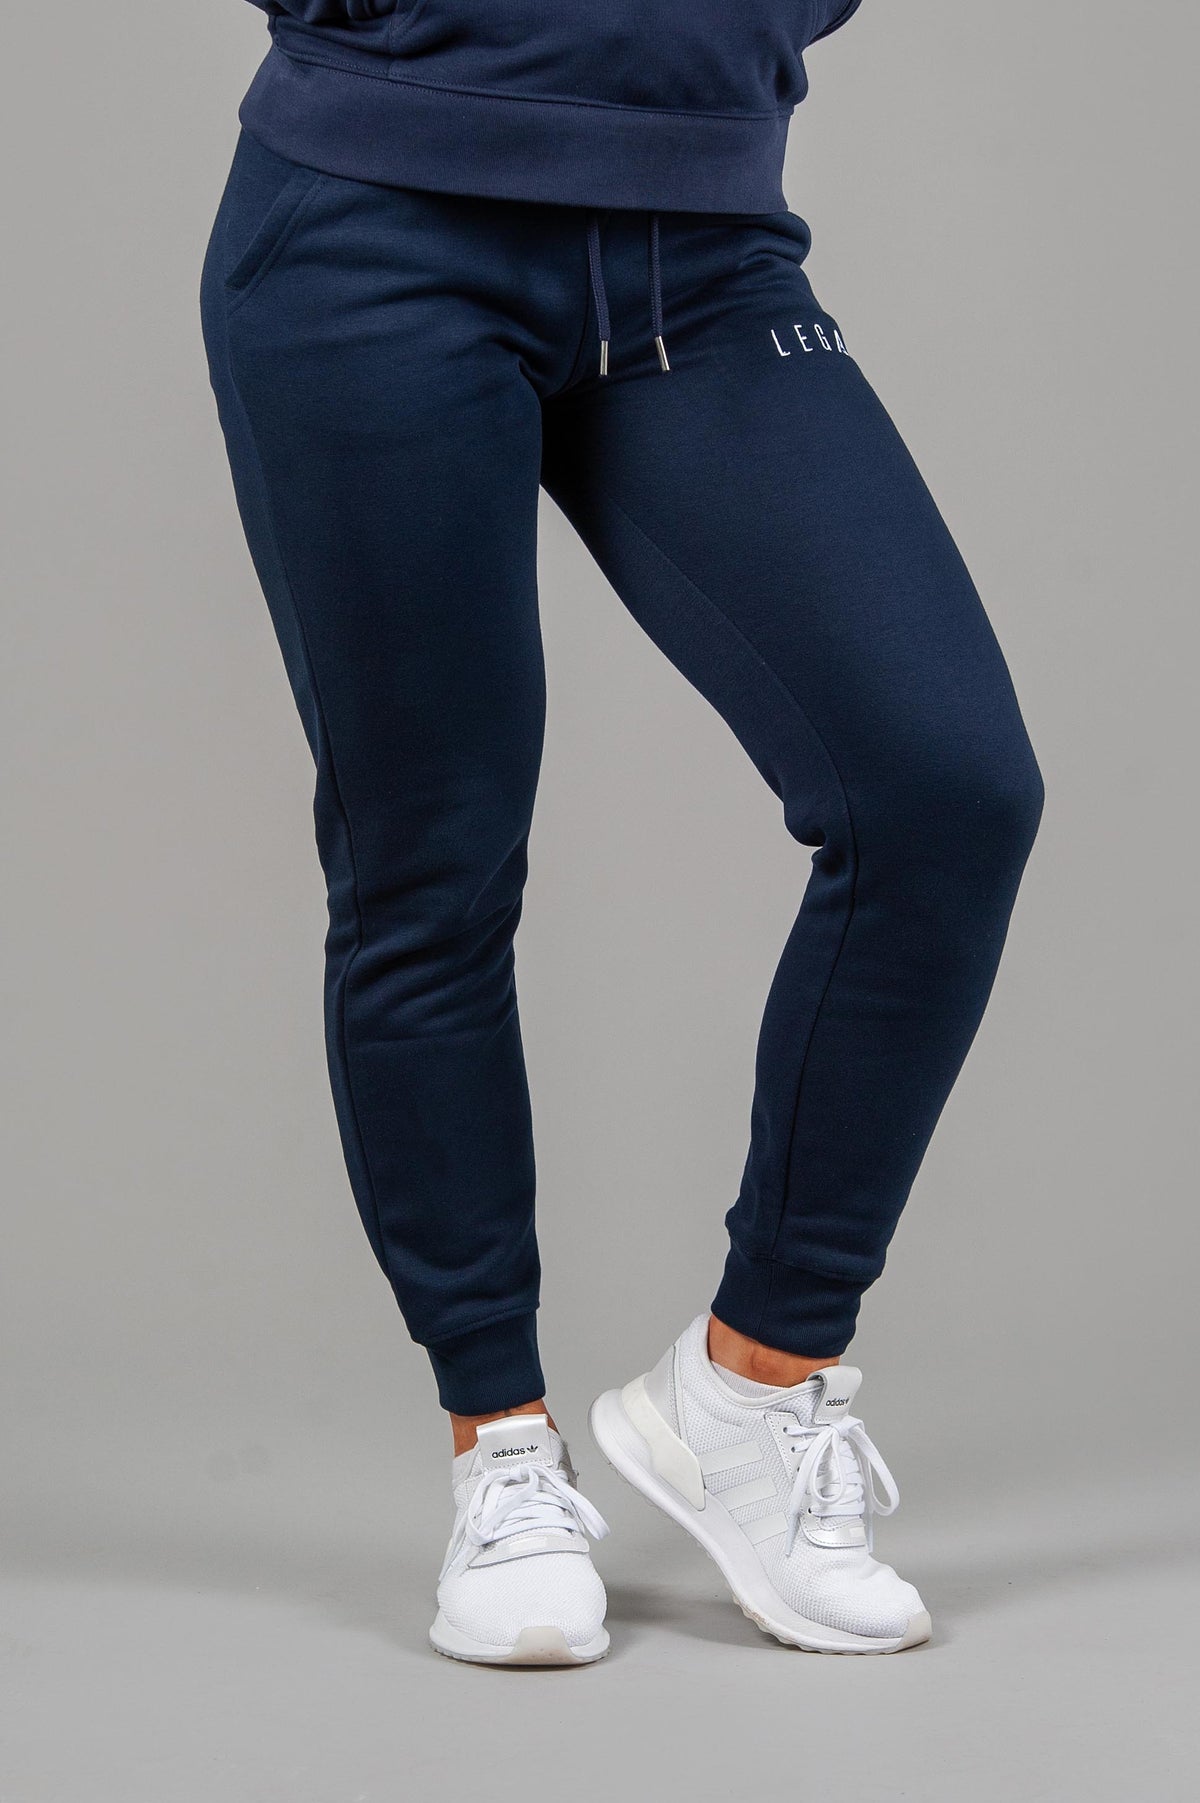 Rest Day Joggers Navy